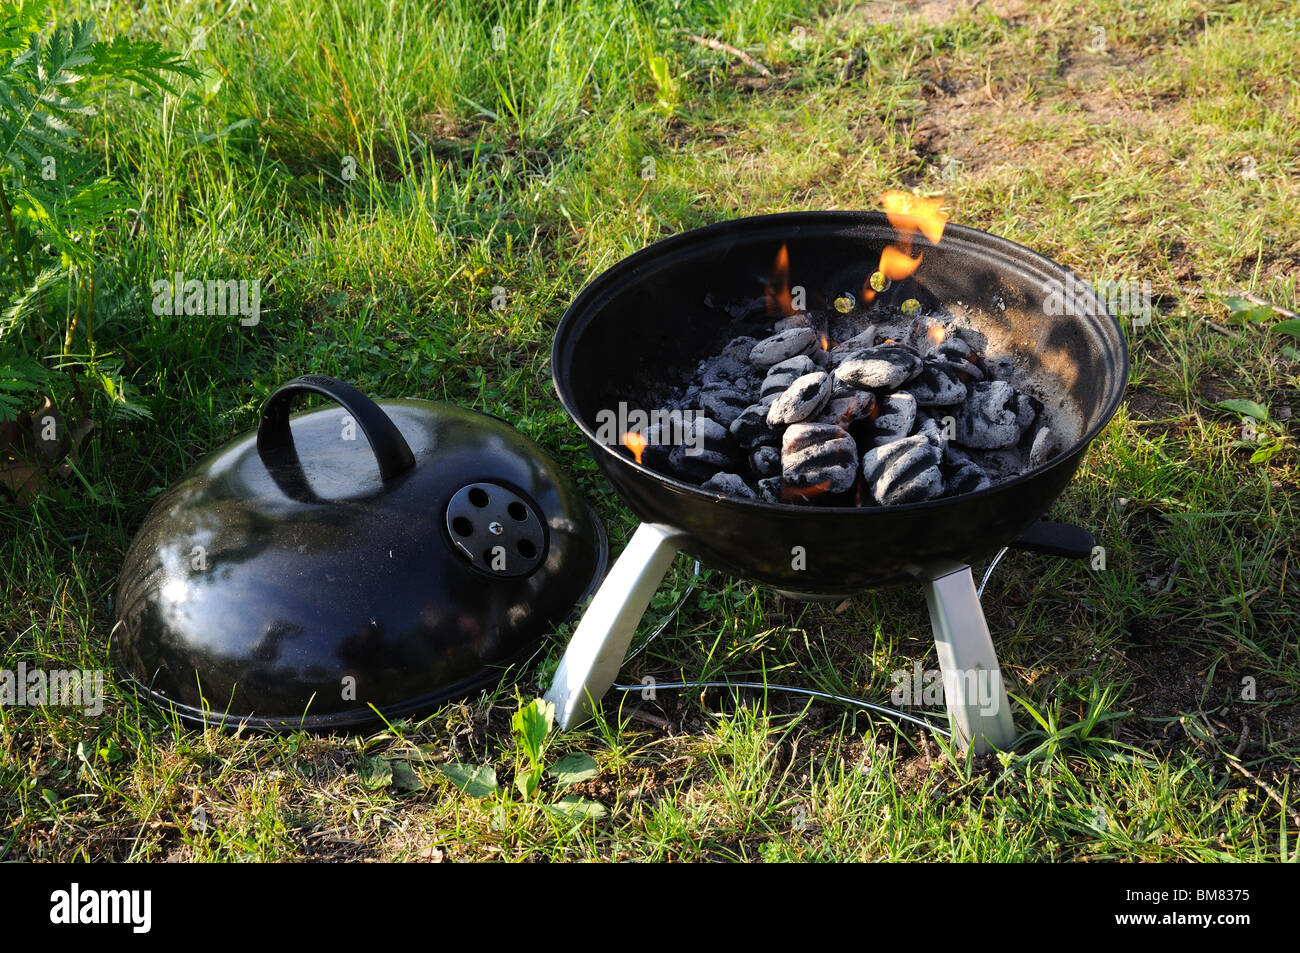 Grill with Charcoal and flames Banque D'Images